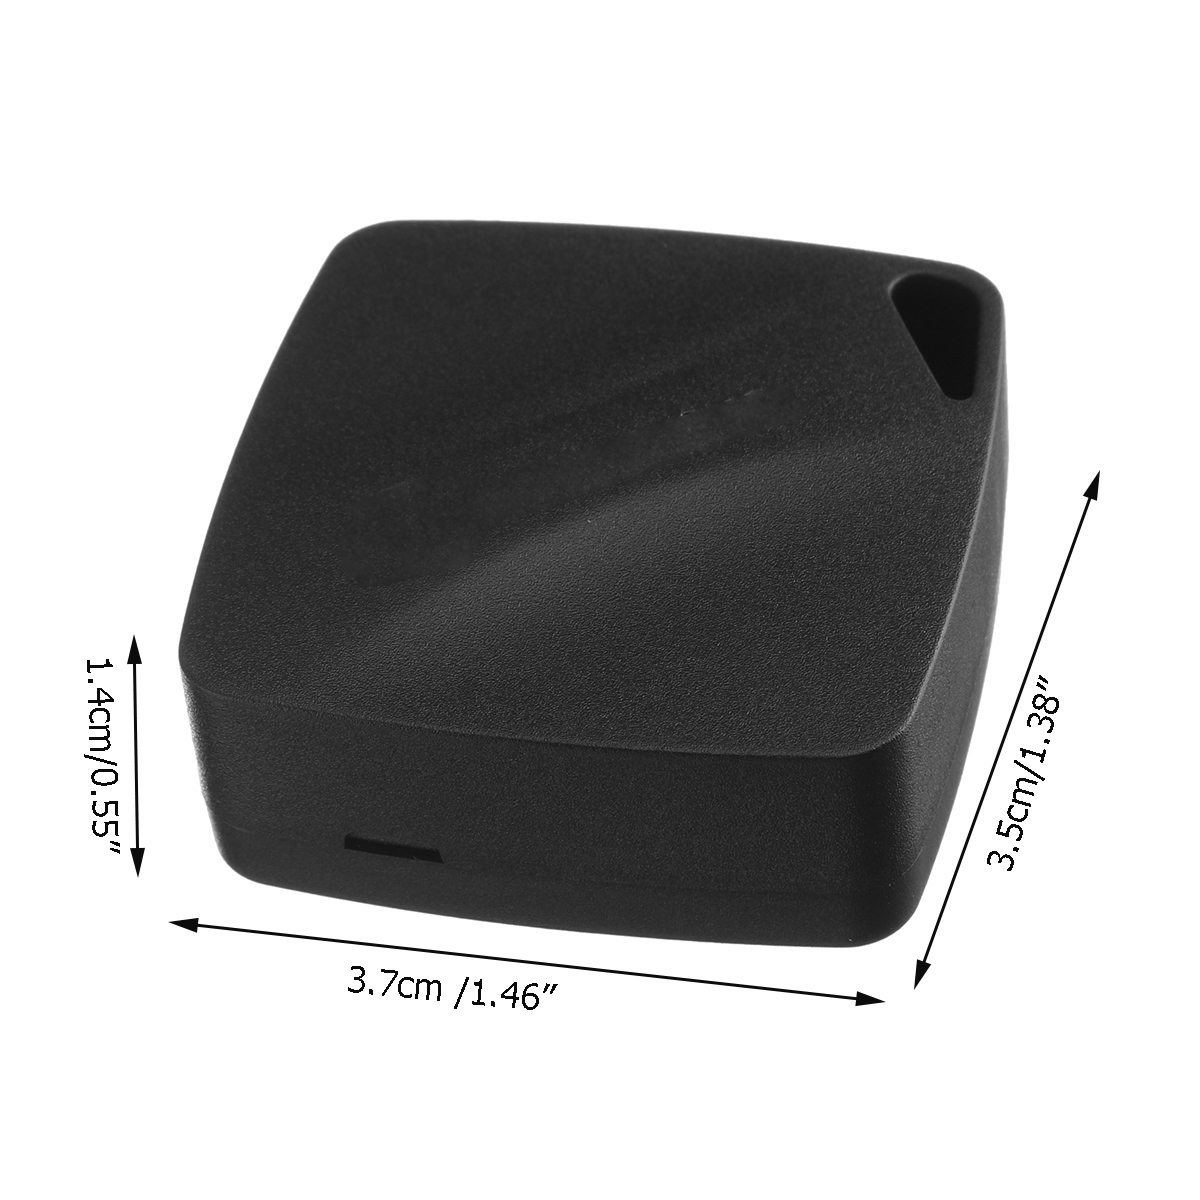 Square-Waterproof-Black-Tracking-Device-Base-Station-Positioning-Location-1725758-9